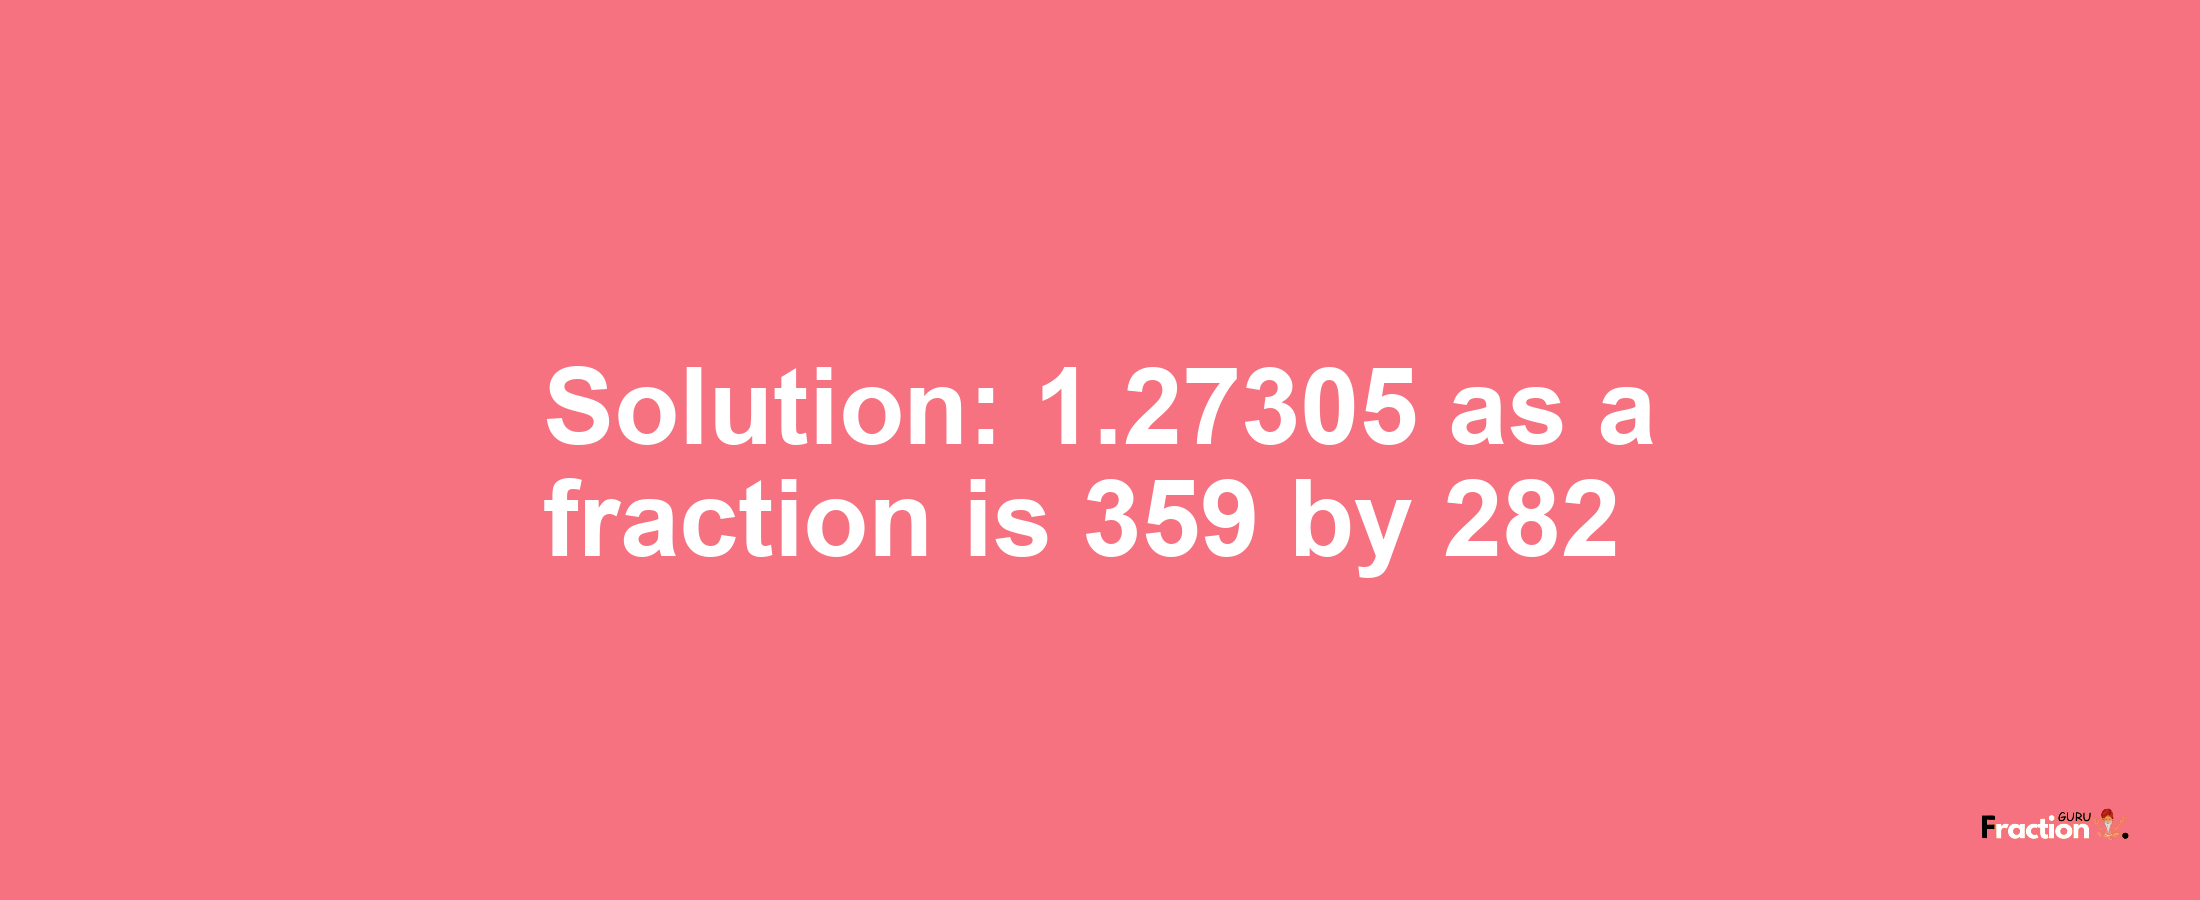 Solution:1.27305 as a fraction is 359/282